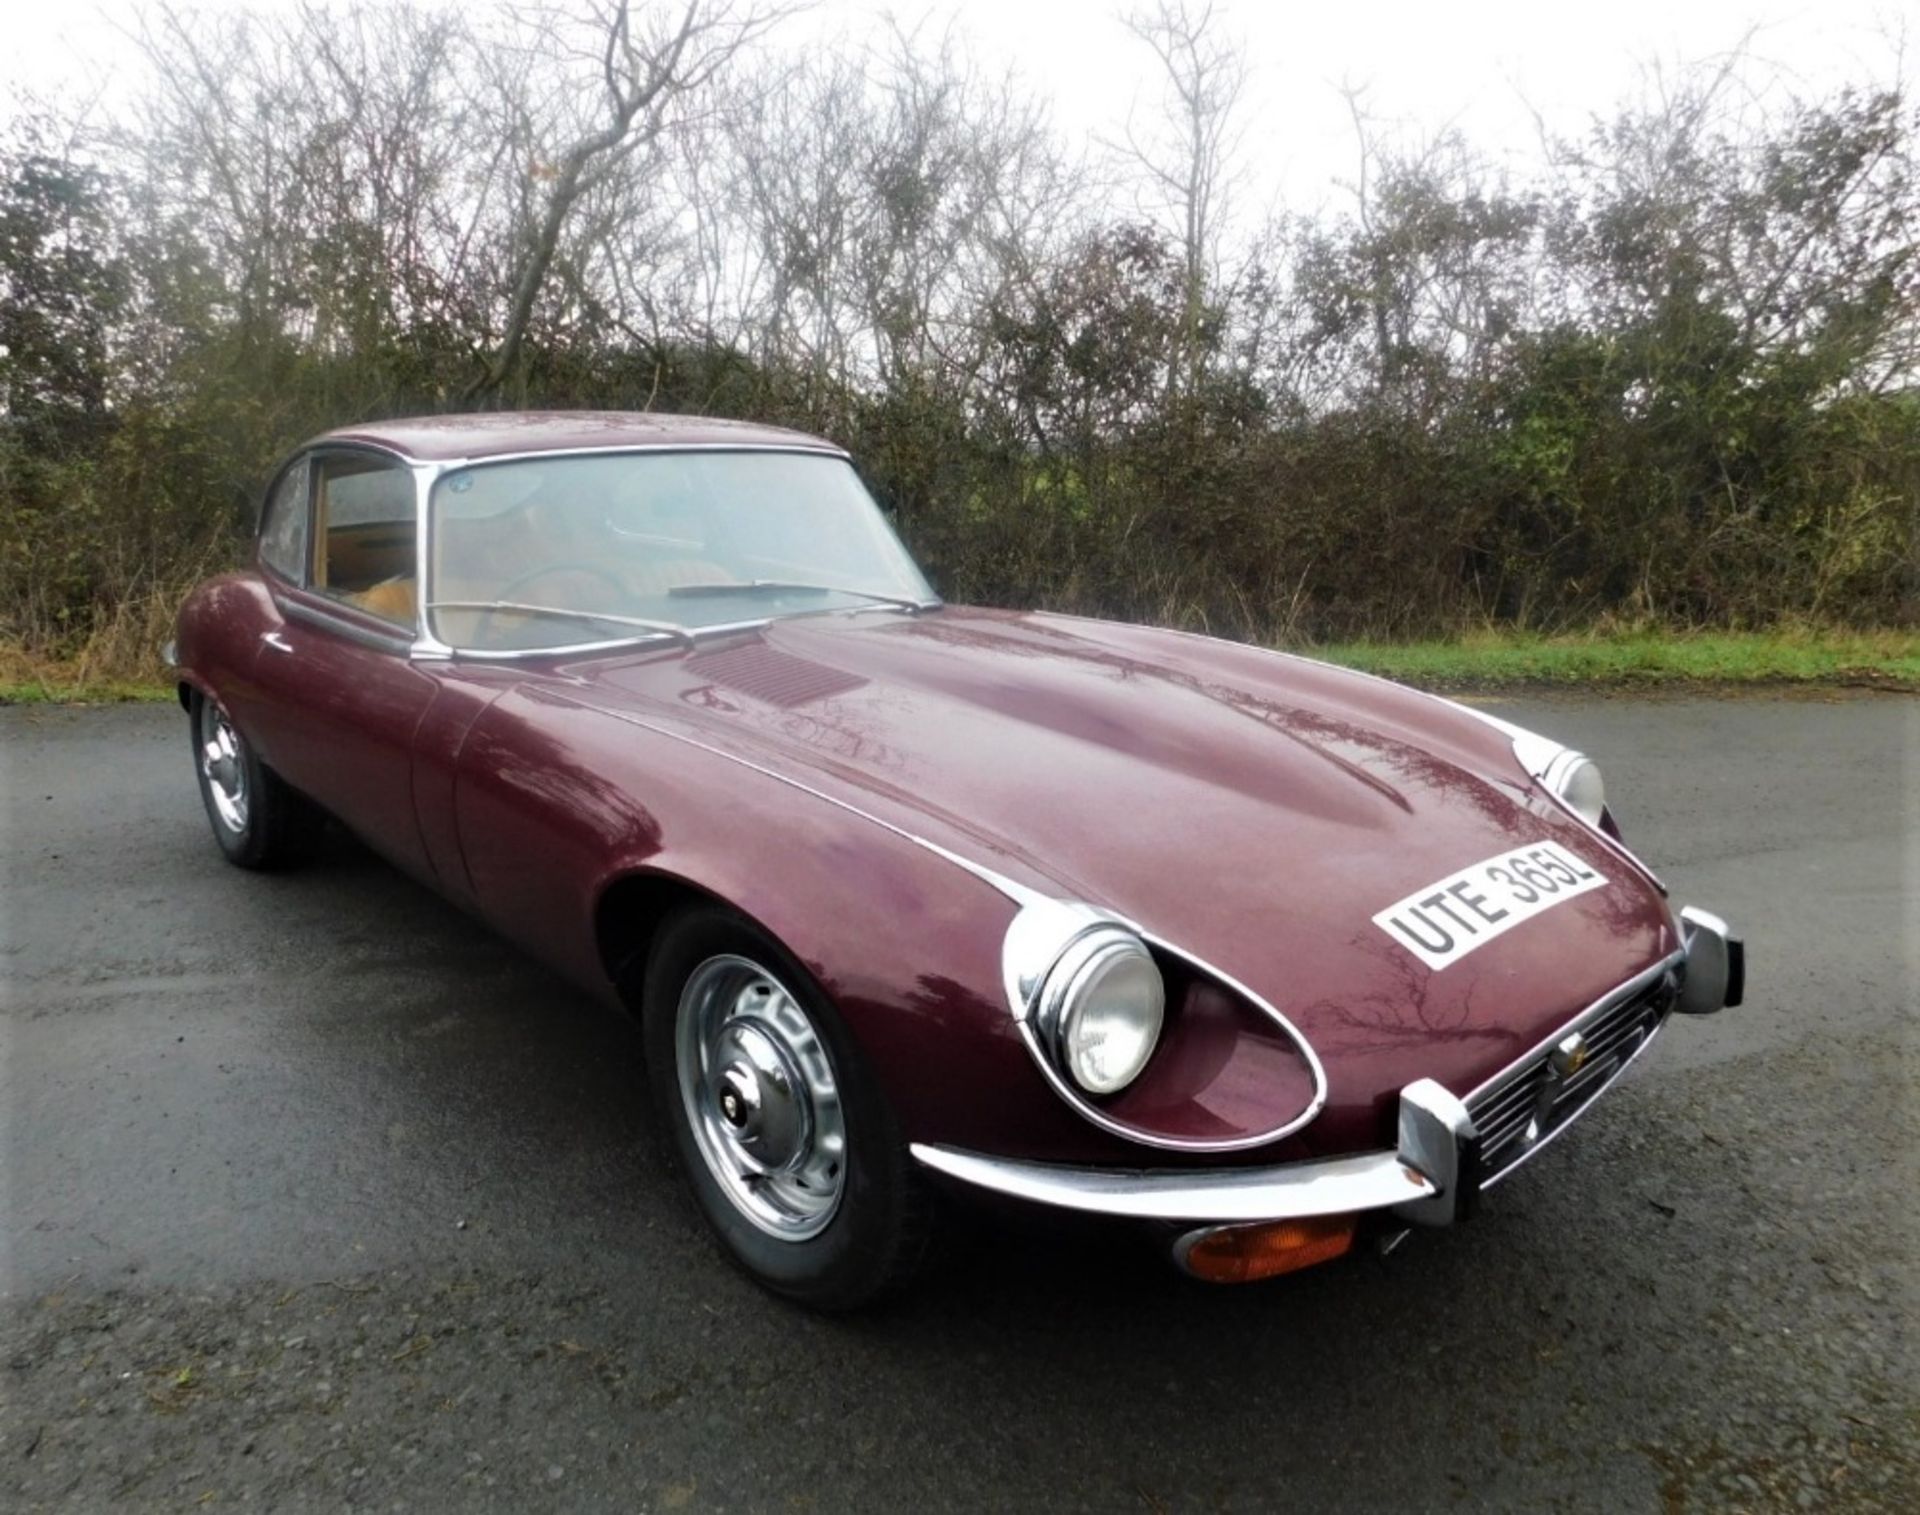 1972 JAGUAR E-TYPE SERIES III FIXED HEAD COUPE Registration Number: UTE 365L Chassis Number: 1S. - Image 2 of 19